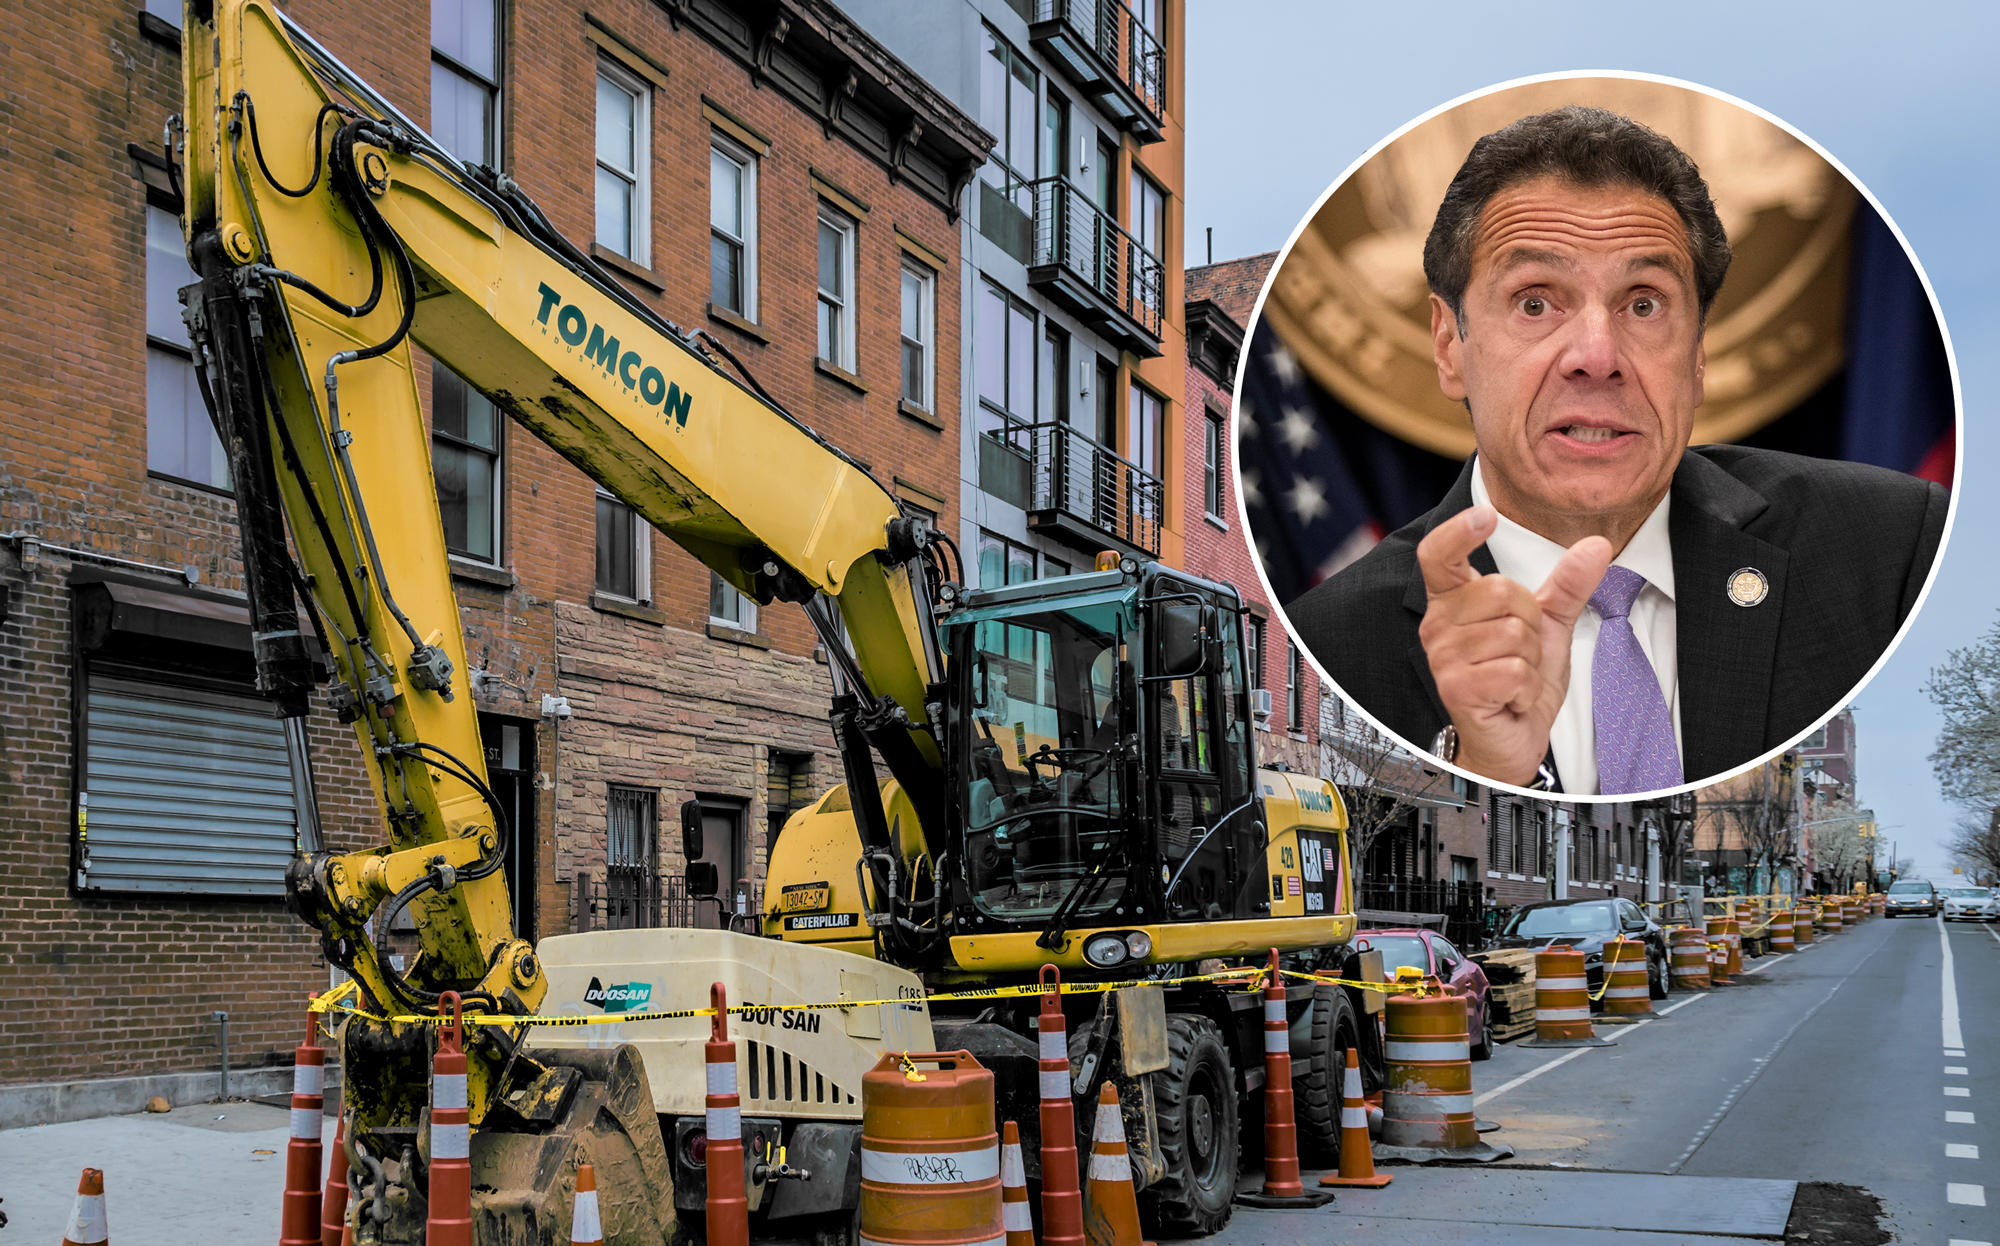 Heavy machinery left on the street after construction halts in order to comply with CDC guidelines due to the COVID19 outbreak. (Photo by Erik McGregor/LightRocket via Getty Images)